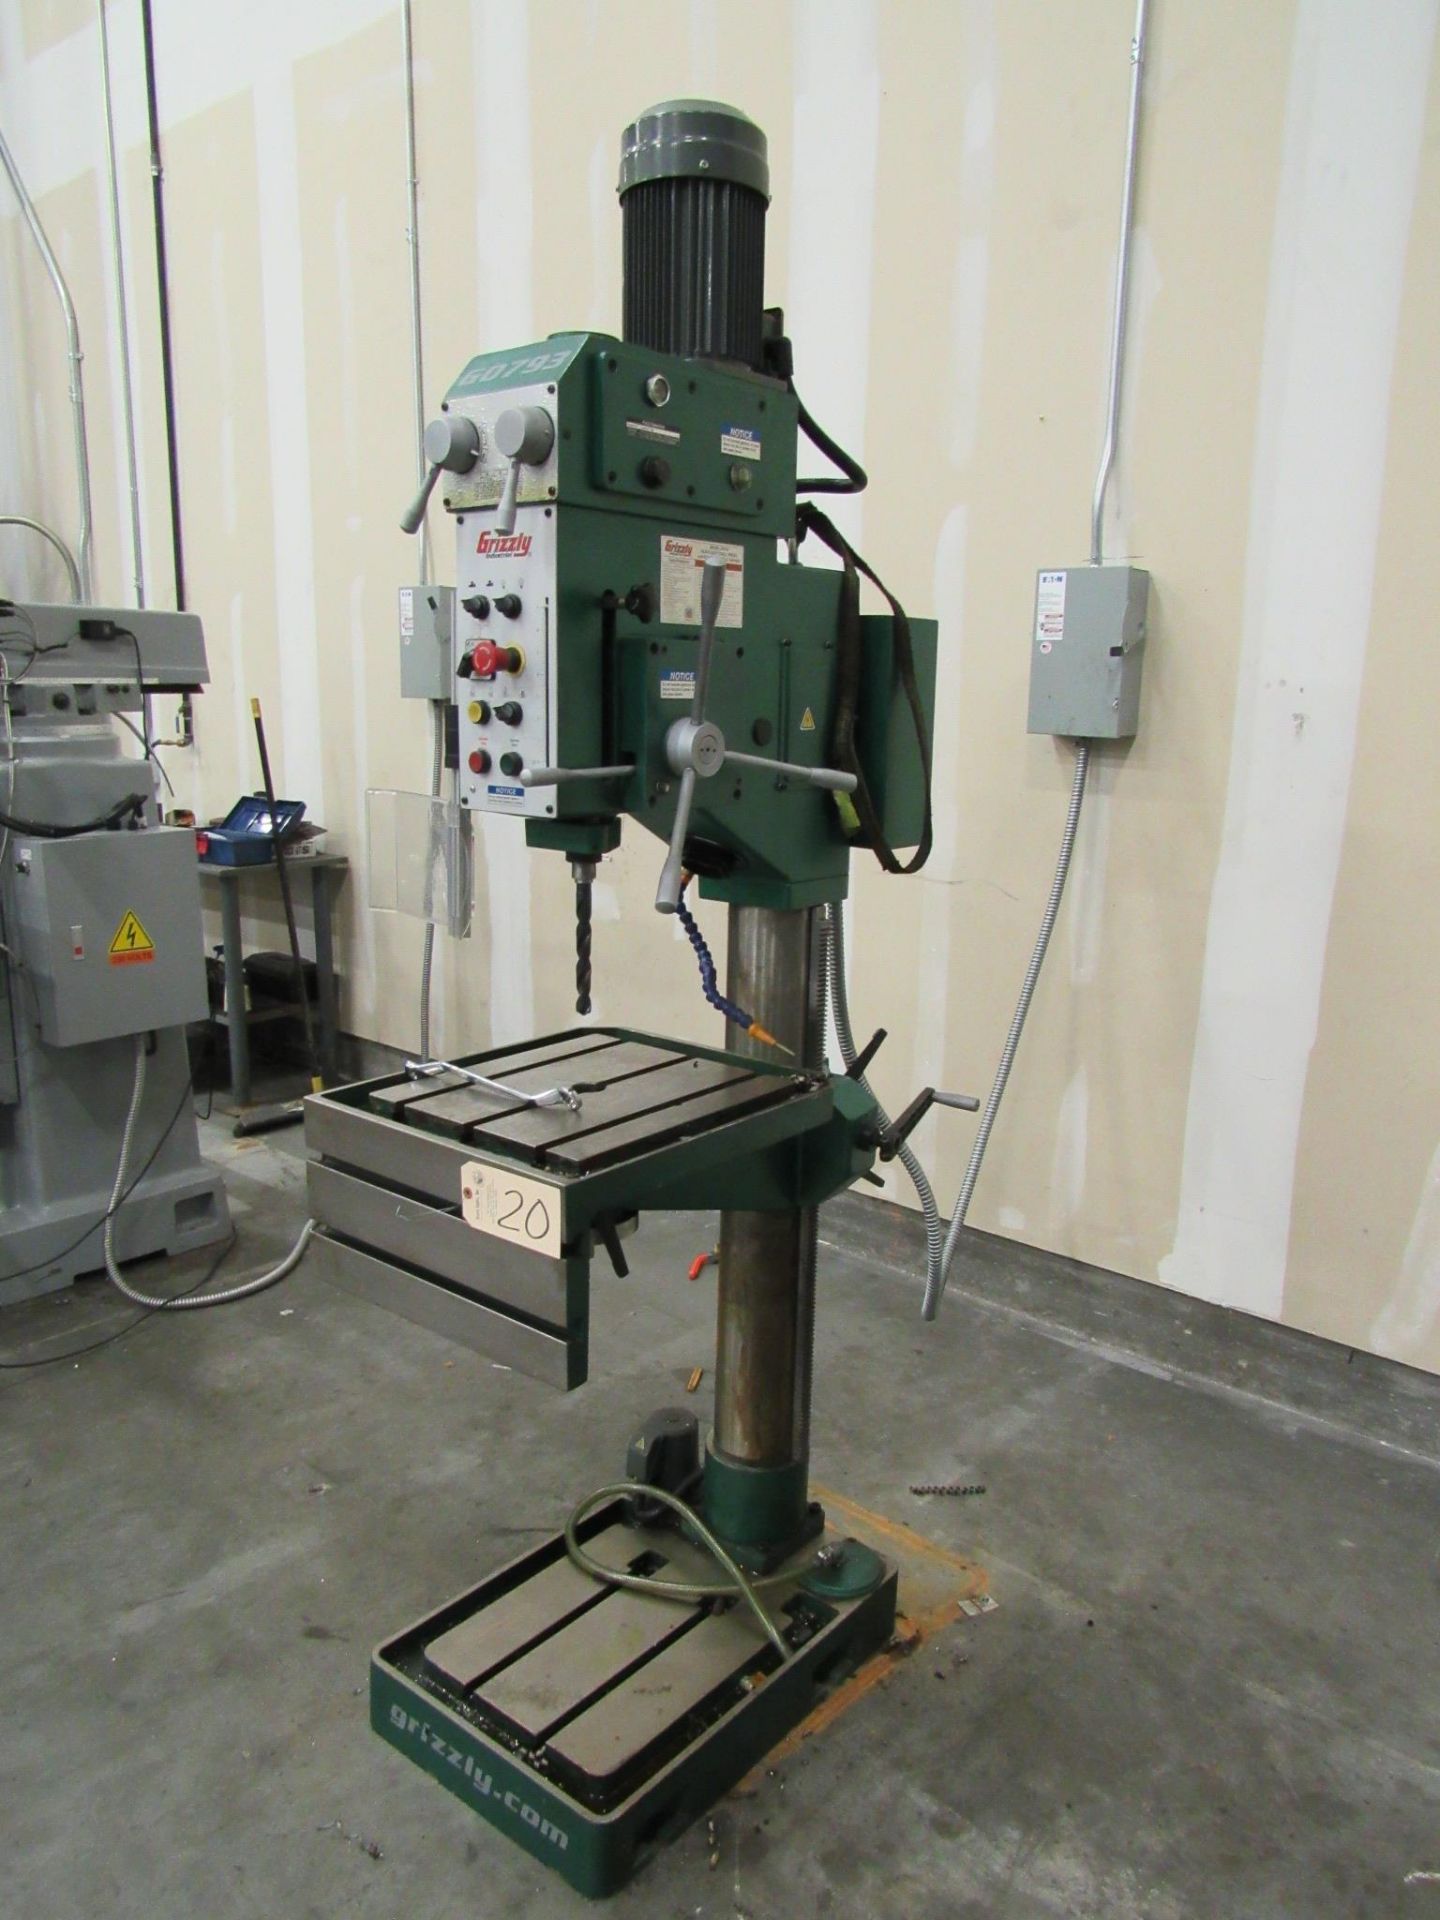 Grizzly Model G0793 Geared Head Drill Press with 27.5'' Swing, Variable Spindle Speeds to 1725 - Image 2 of 5